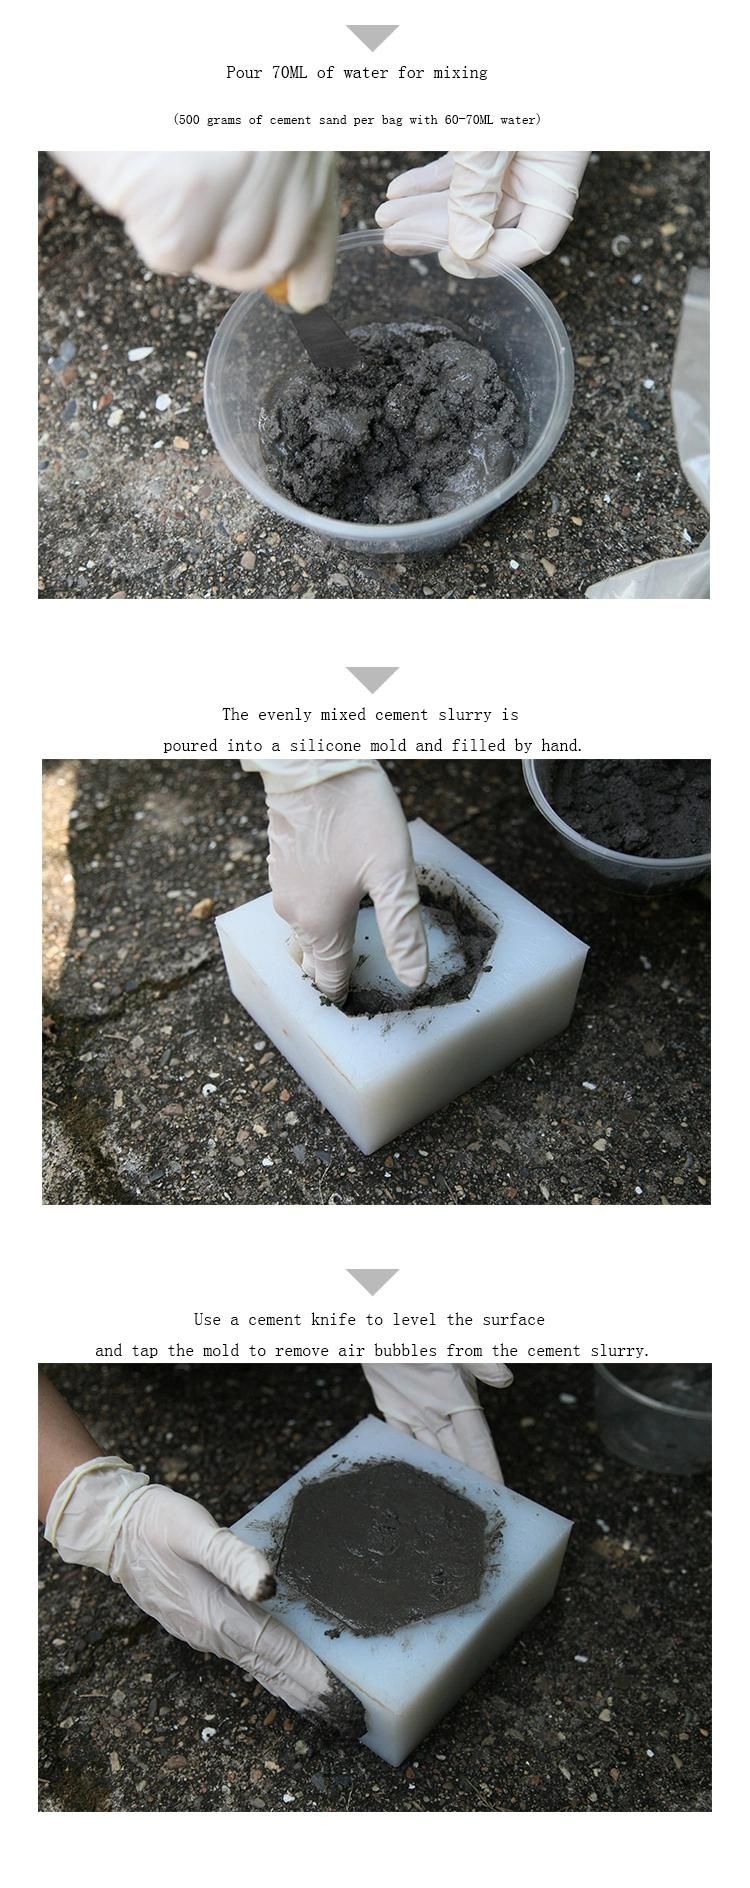 Factory Price Rhombic Concrete Home Decoration Silicone Flower Planter Mold in UK